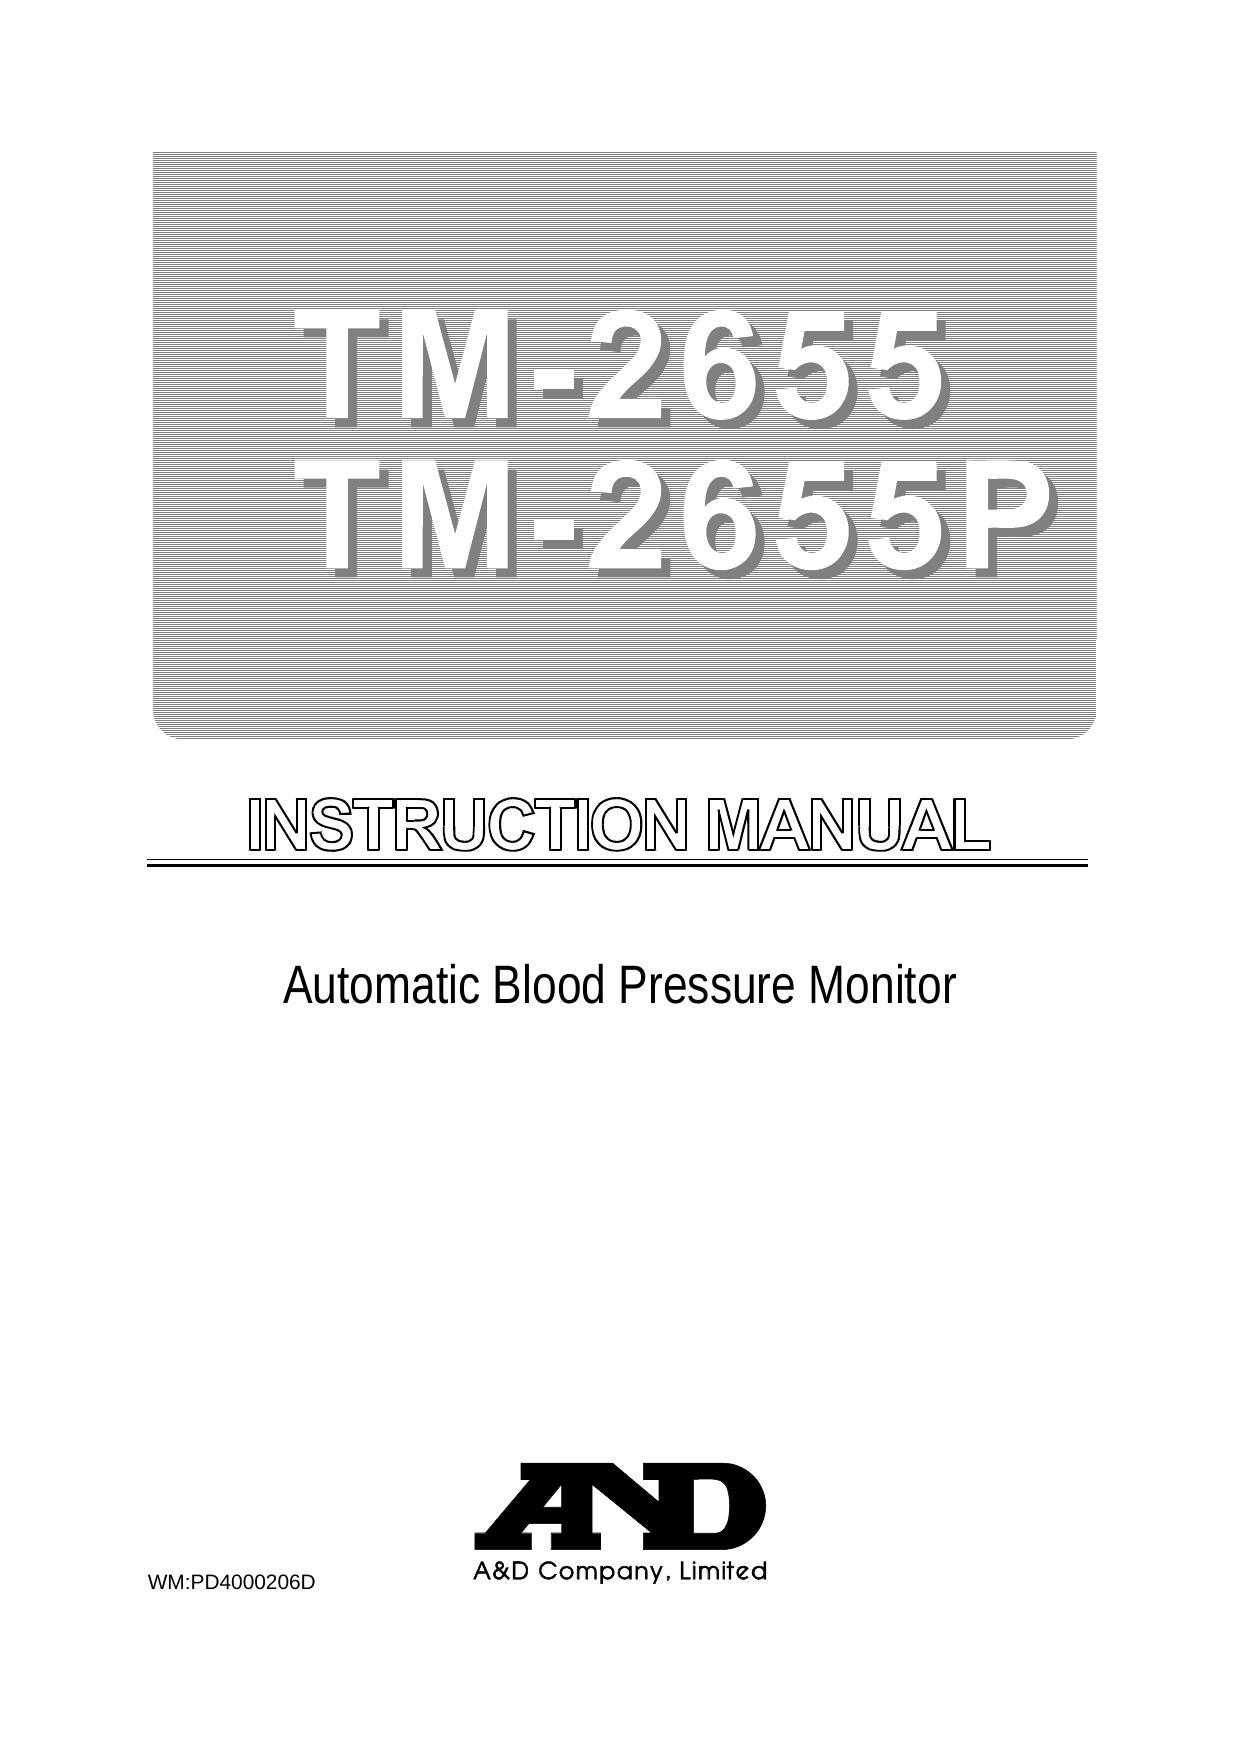 instruction-manual-for-automatic-blood-pressure-monitor-tm-2655-tm2655p.pdf